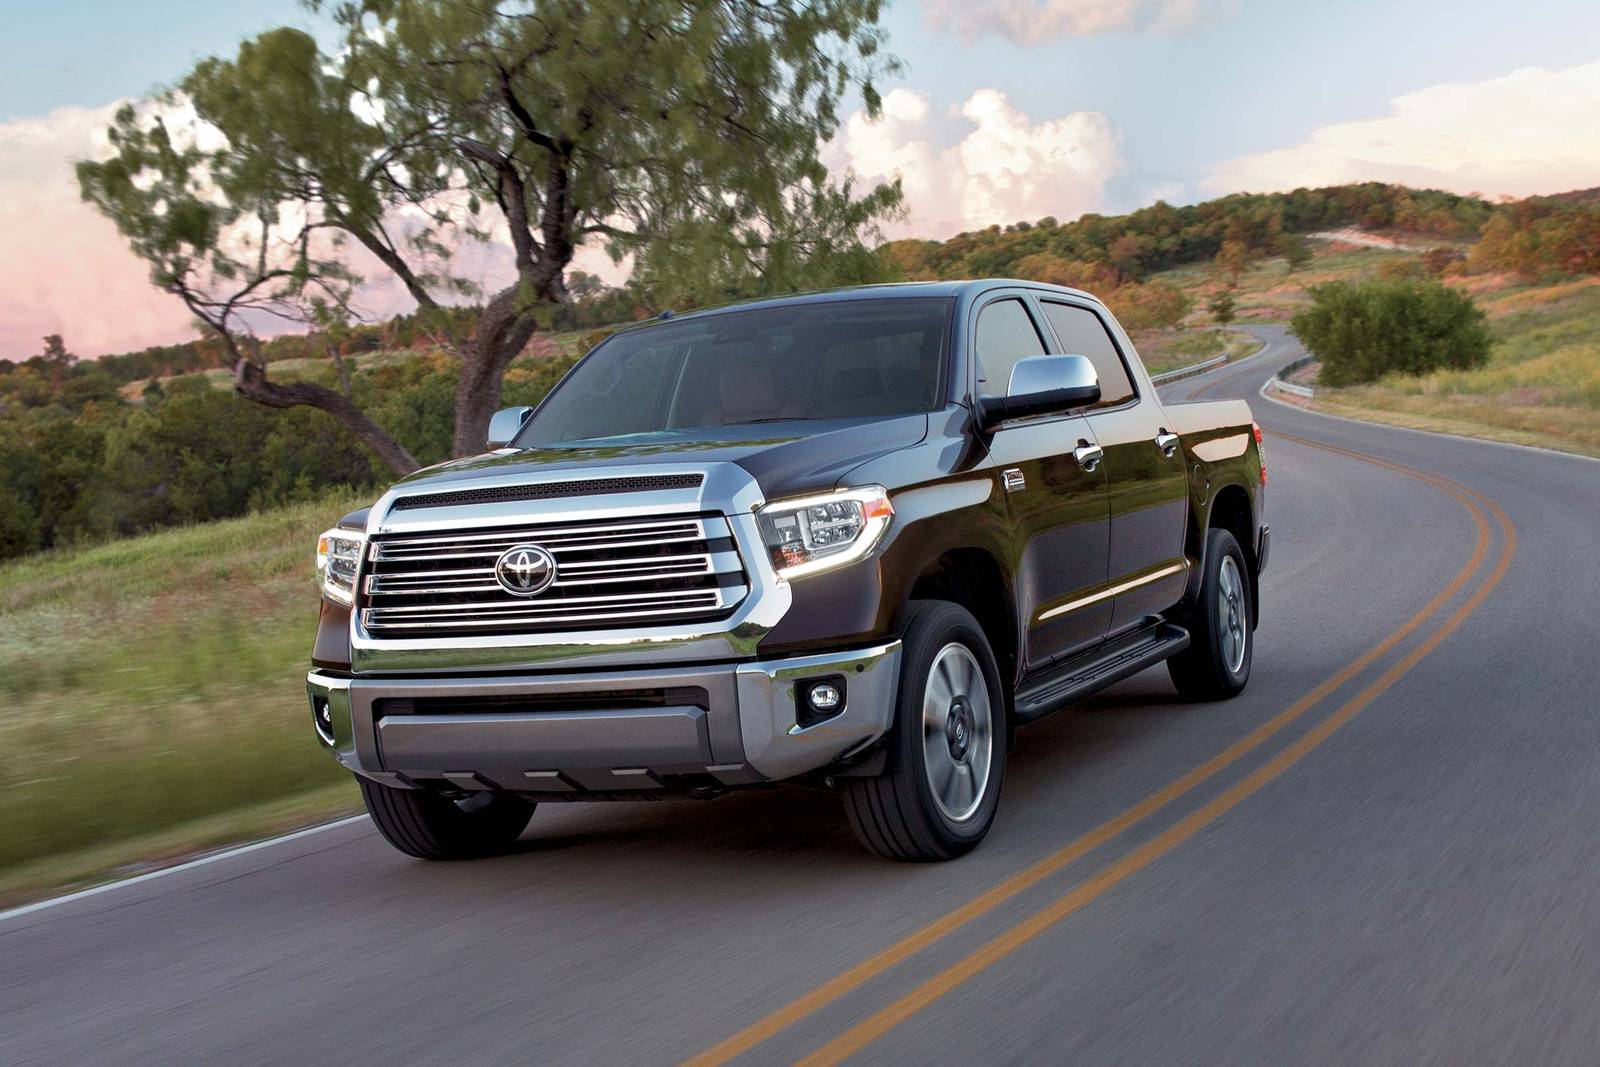 Used 2019 Toyota Tundra CrewMax Review | Edmunds